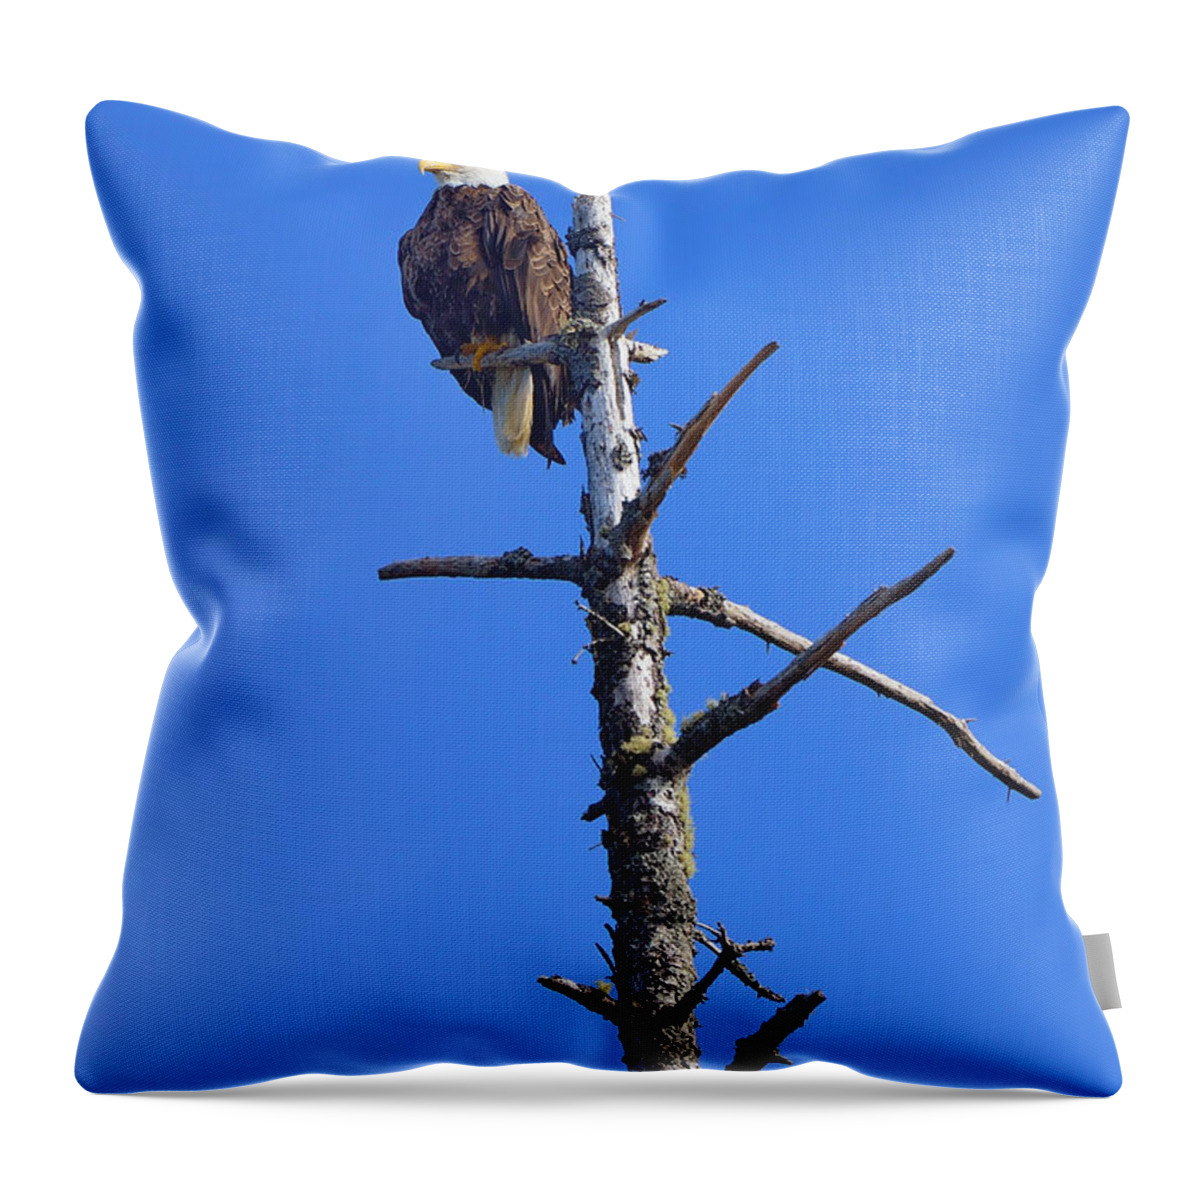 Bald Eagle Throw Pillow featuring the photograph Coastal Bald Eagle by Greg Norrell